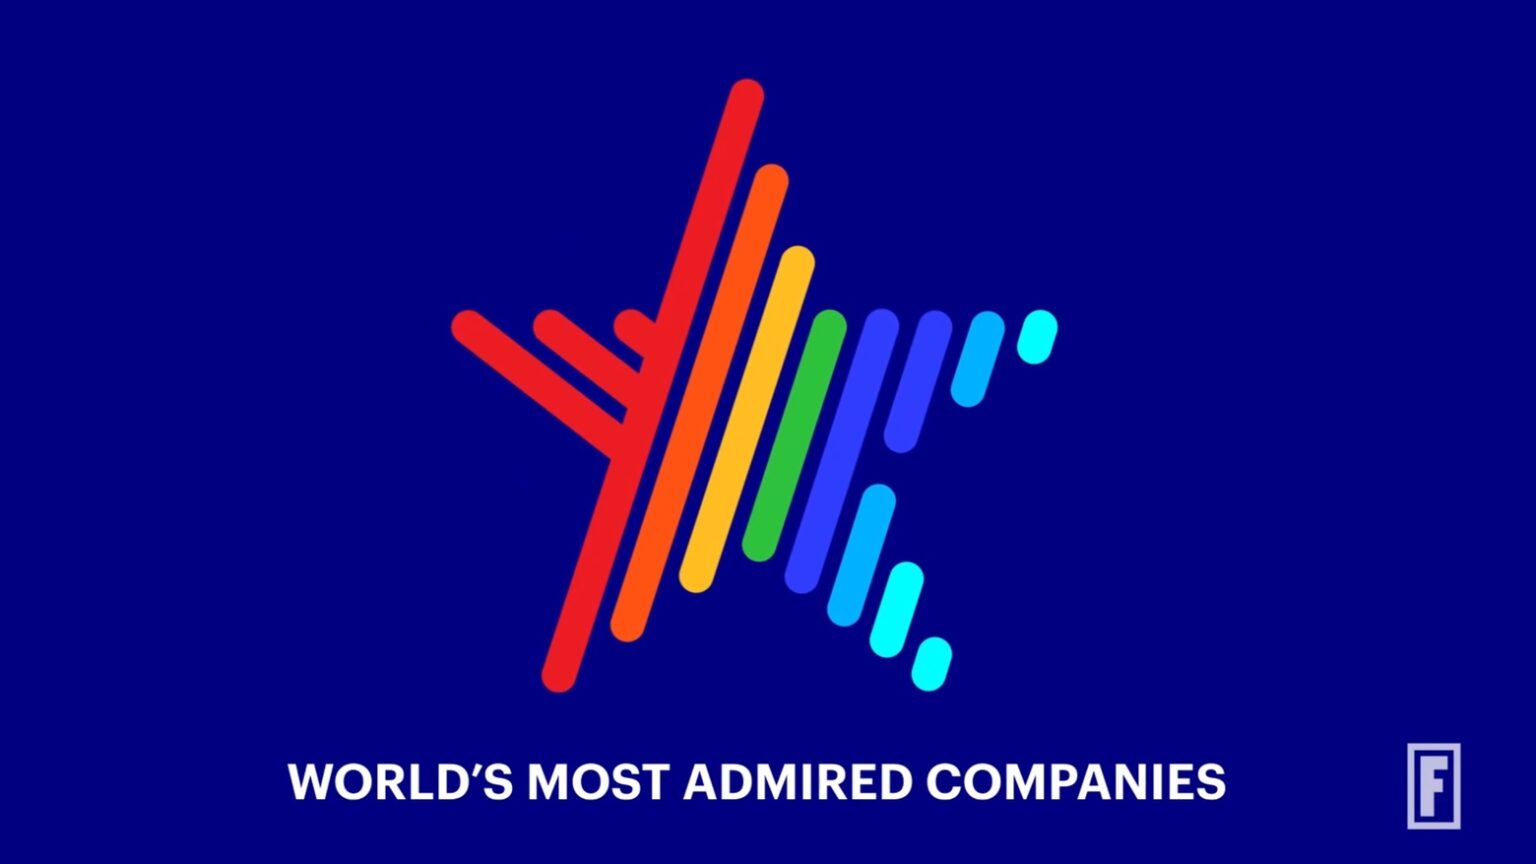 Apple hits 16 years at top of ‘world’s most admired companies’ list